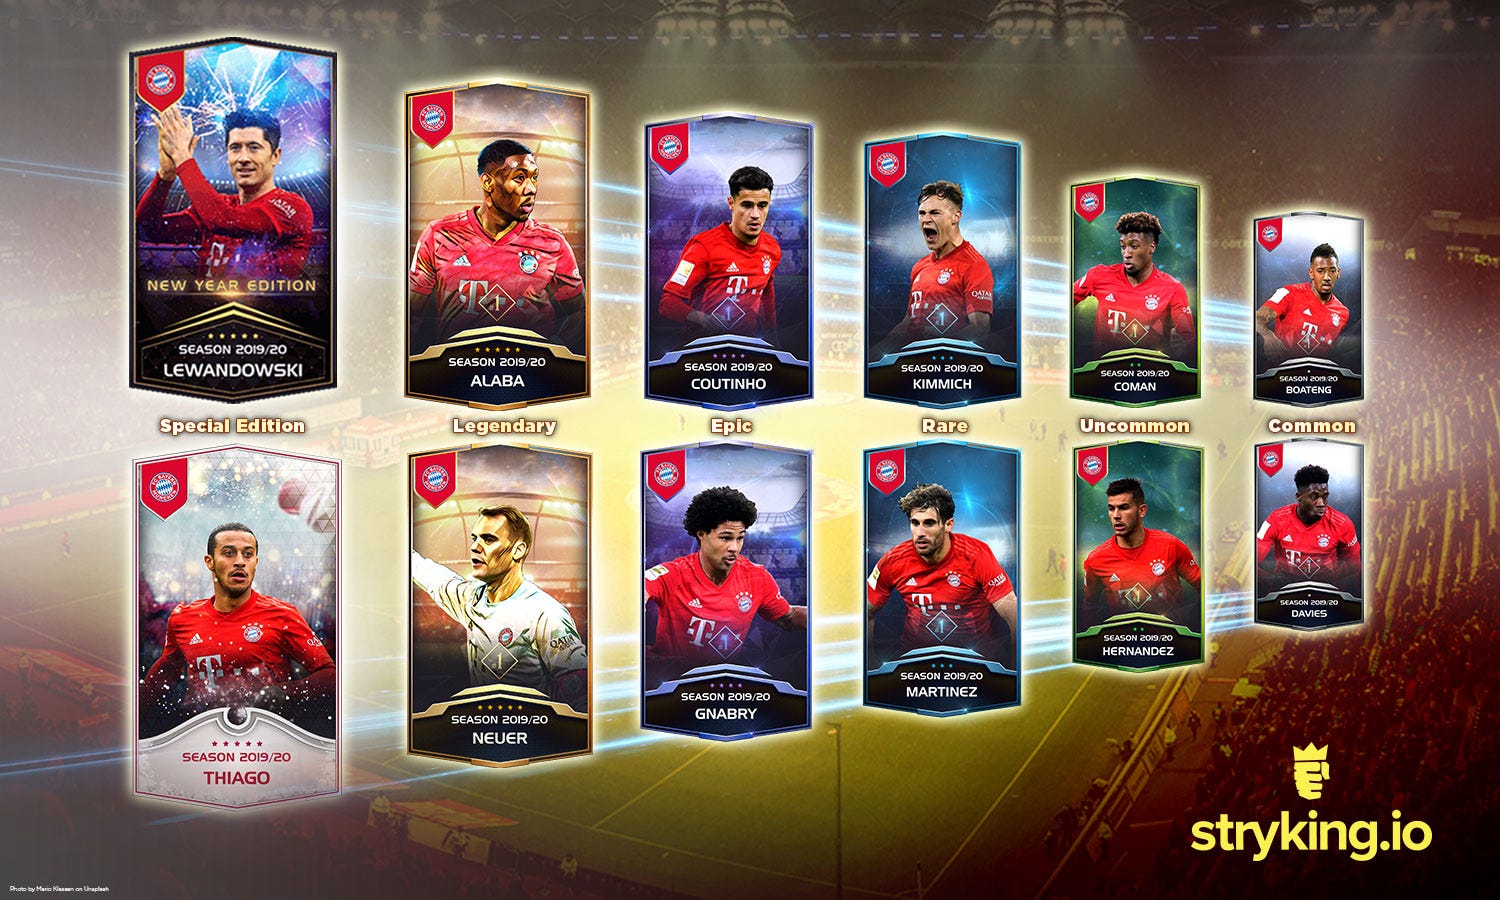 Stryking Io And Fc Bayern Munich Take Digital Collectibles With A Money Back Guarantee By Lukas Schulze Stryking Io Medium